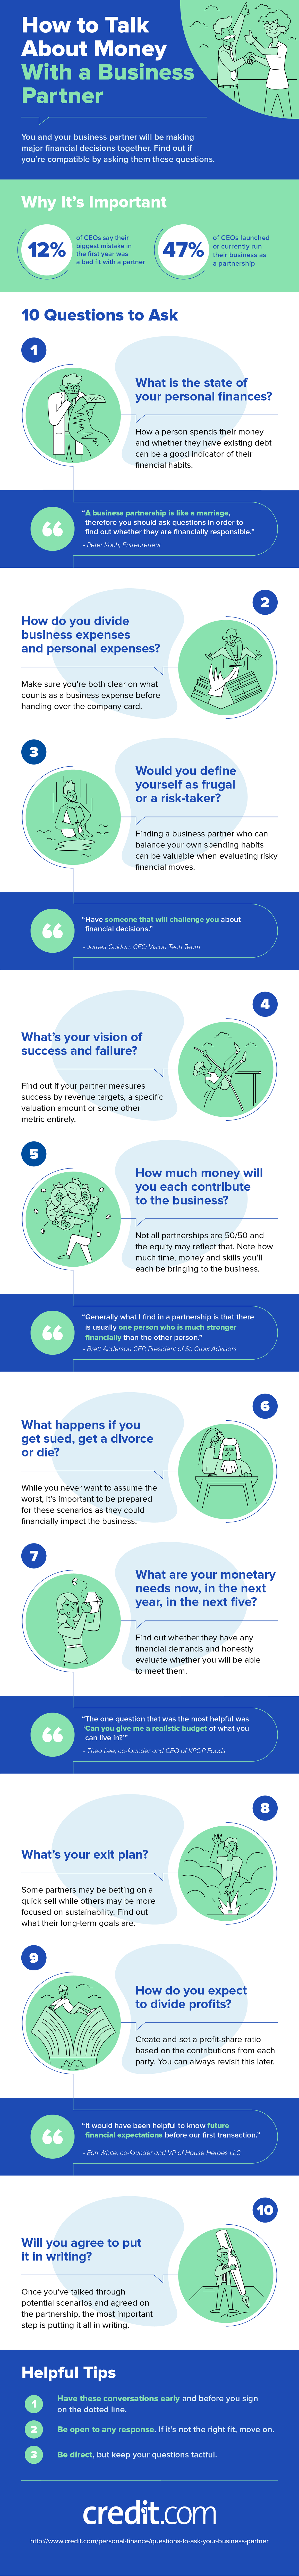 financial-questions-to-ask-your-business-partner-infographic